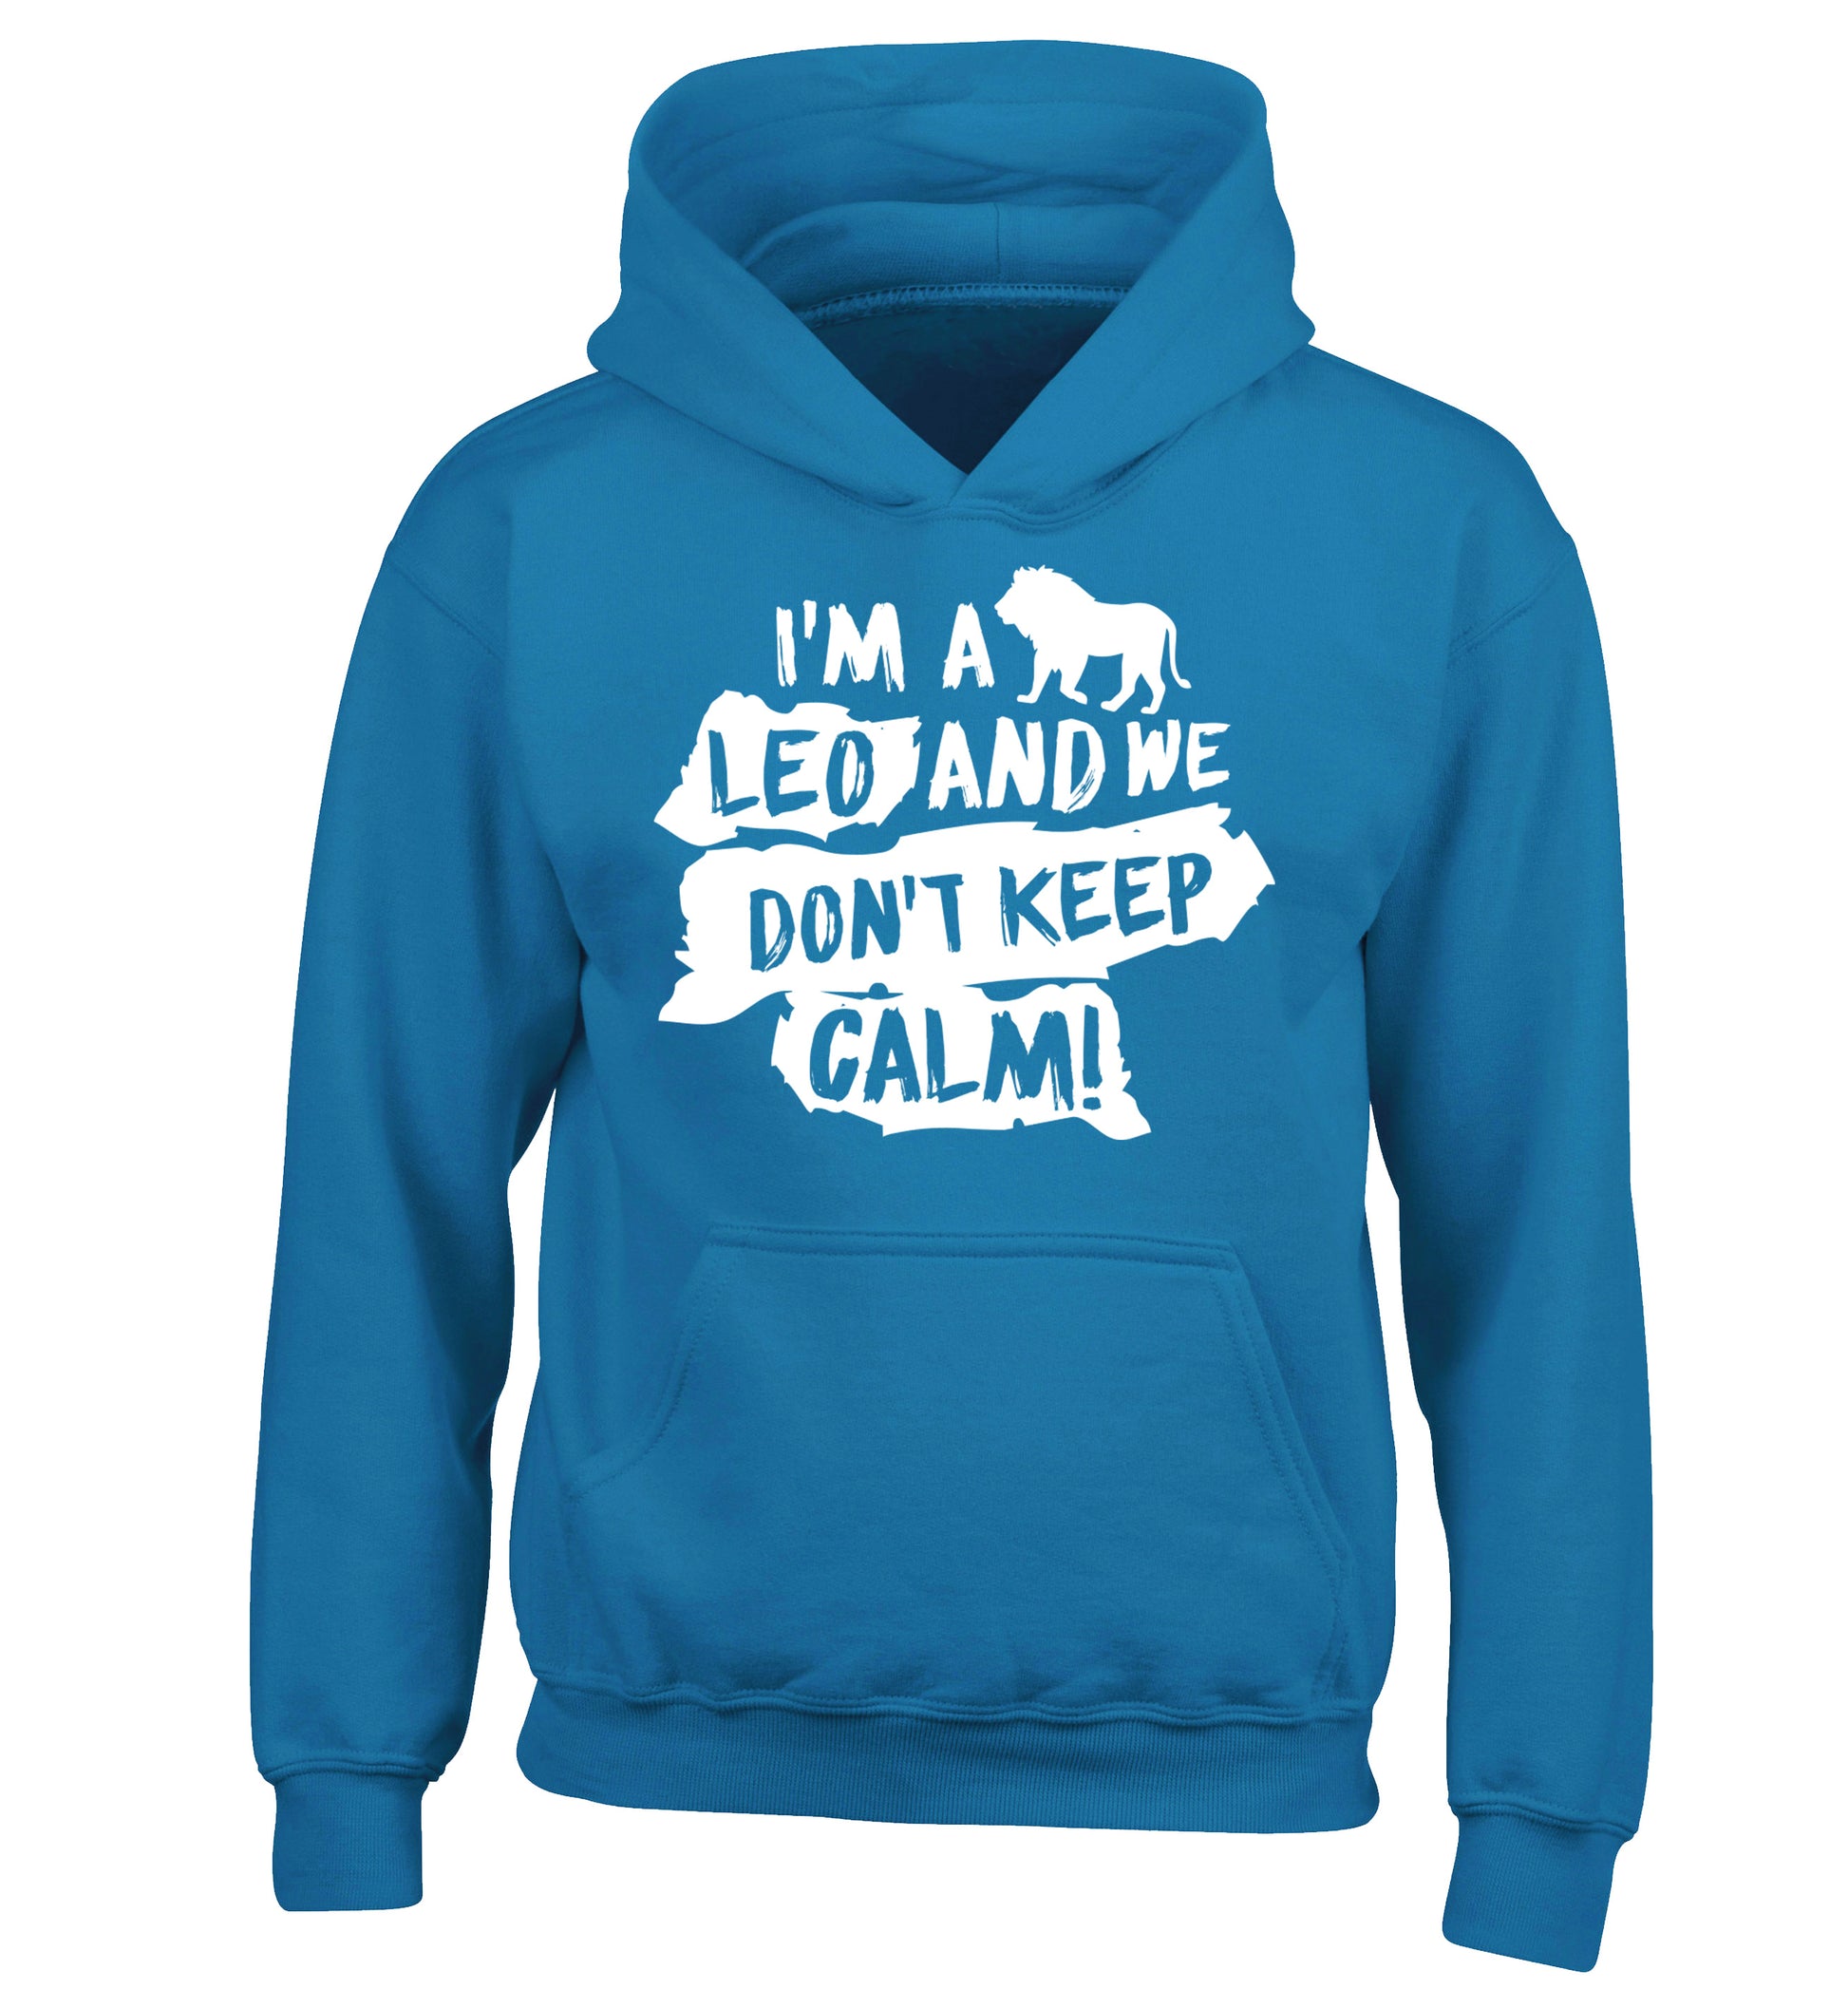 I'm a leo and we don't keep calm! children's blue hoodie 12-13 Years